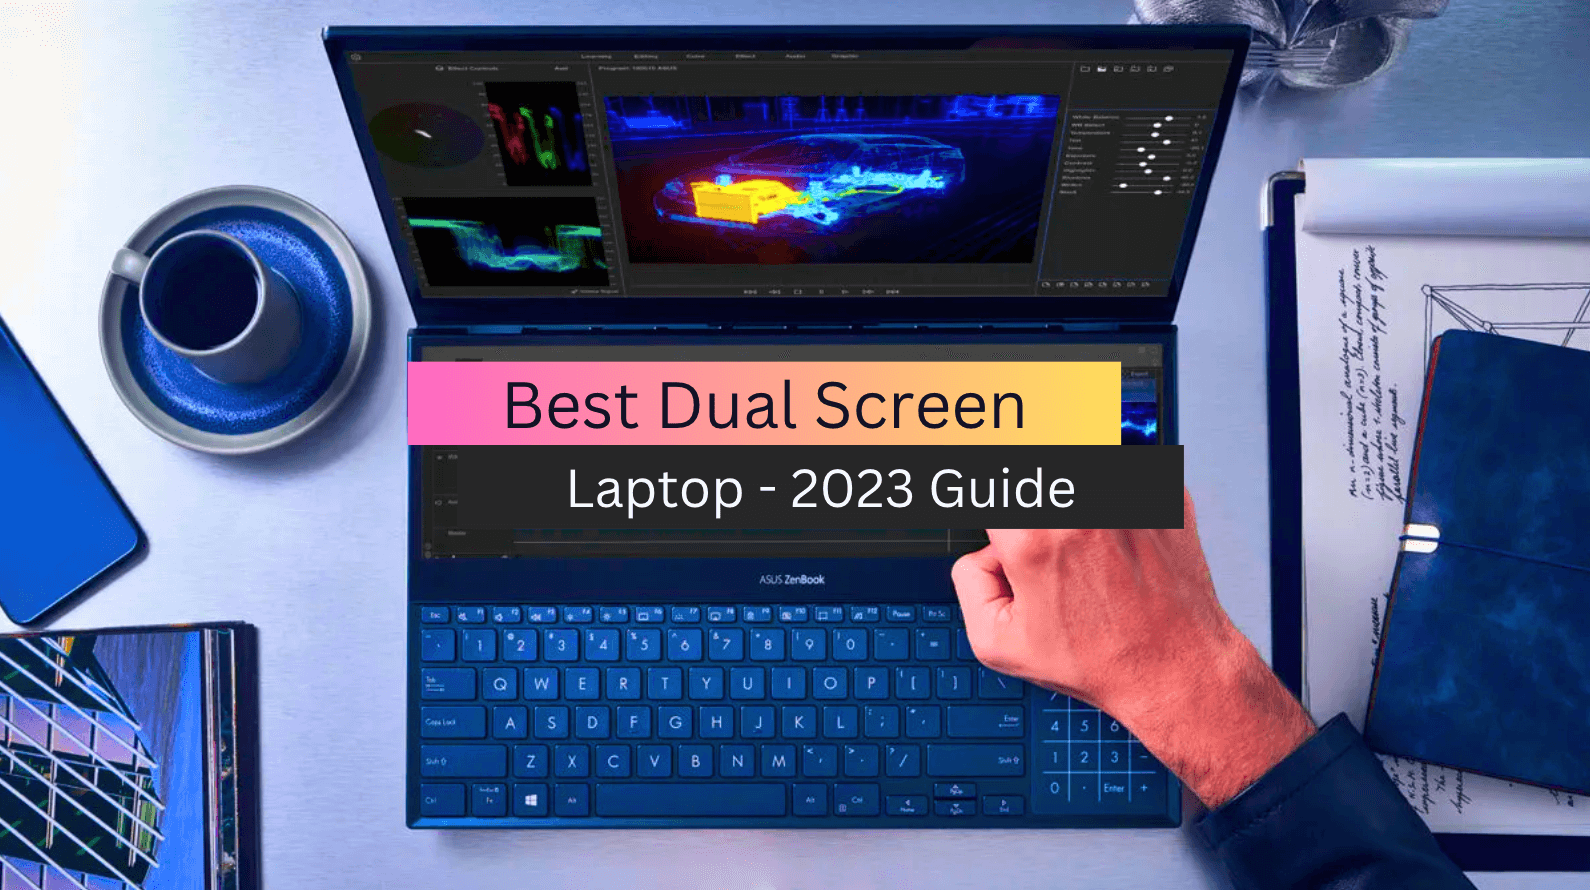 6 Best Dual Screen Laptop in 2023 (An Ultimate Buyer's Guide)